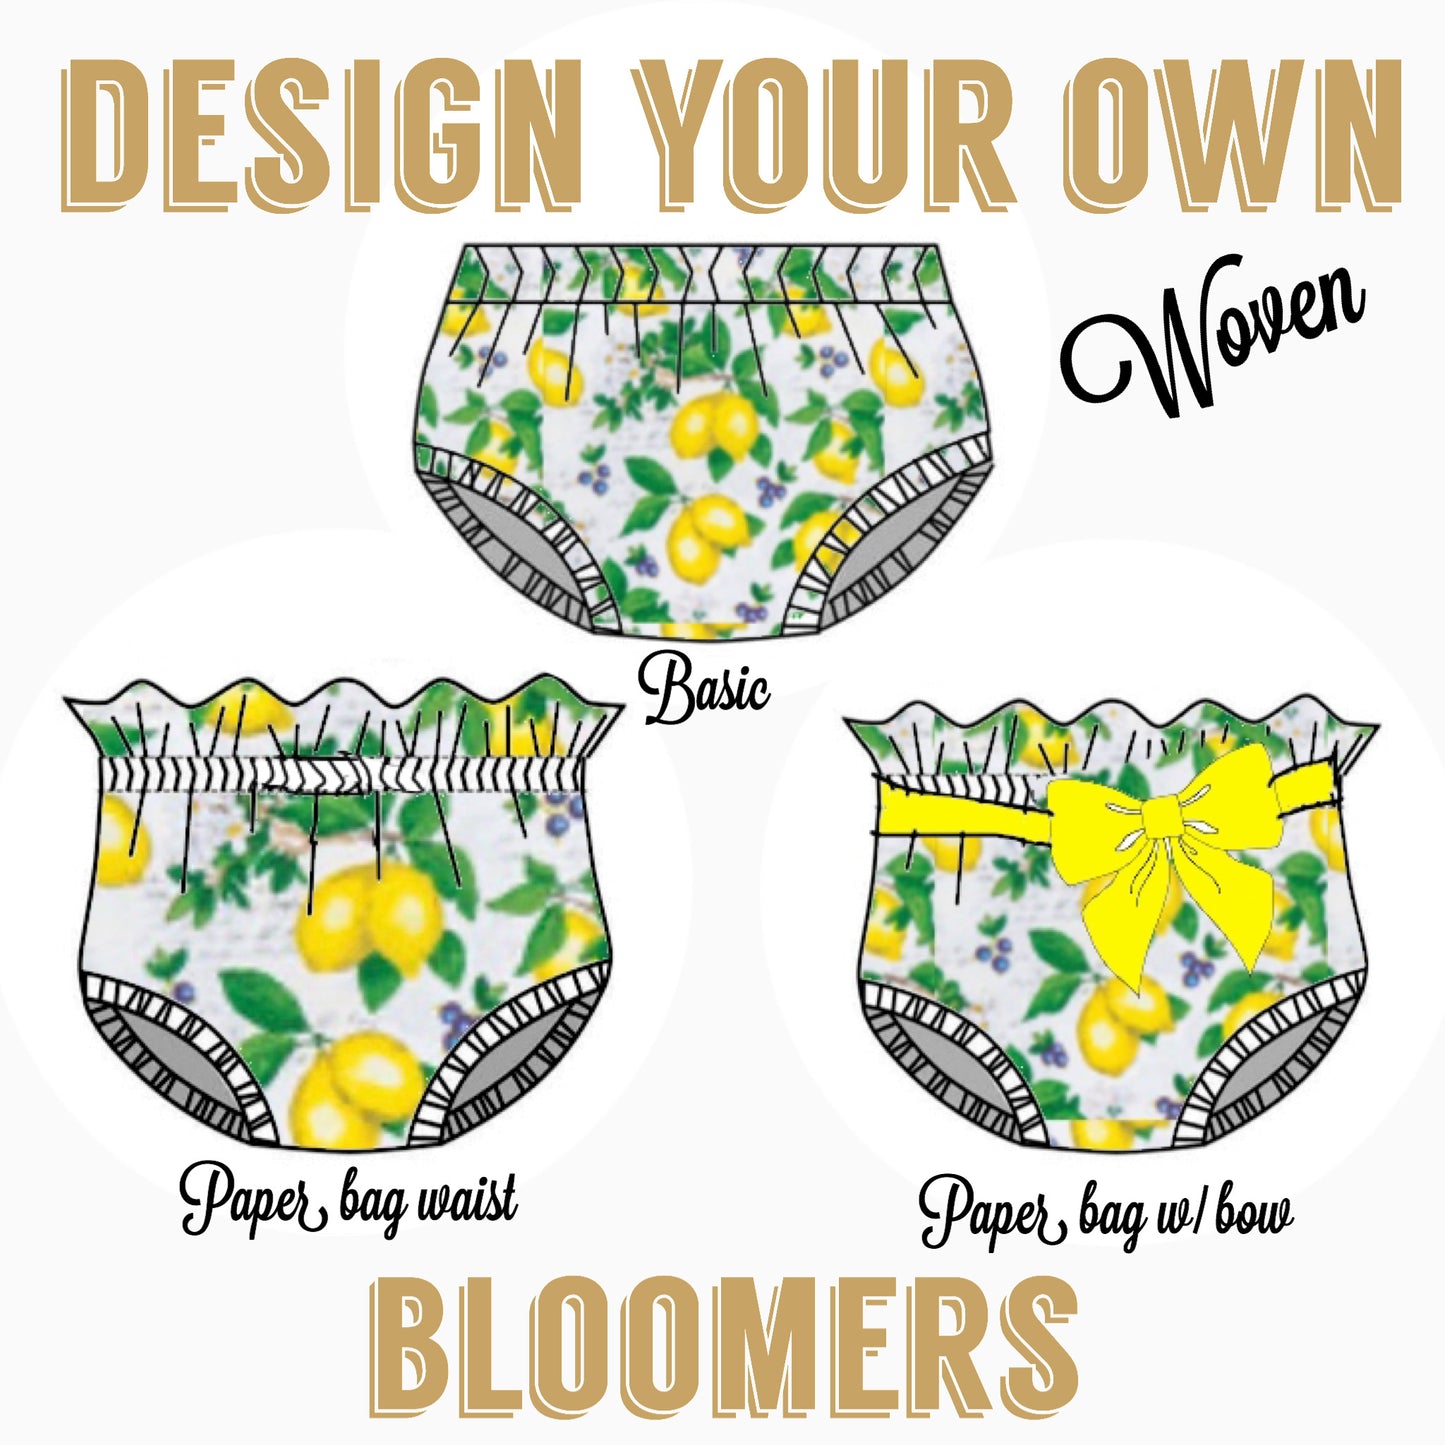 Design your own| Woven Bloomers